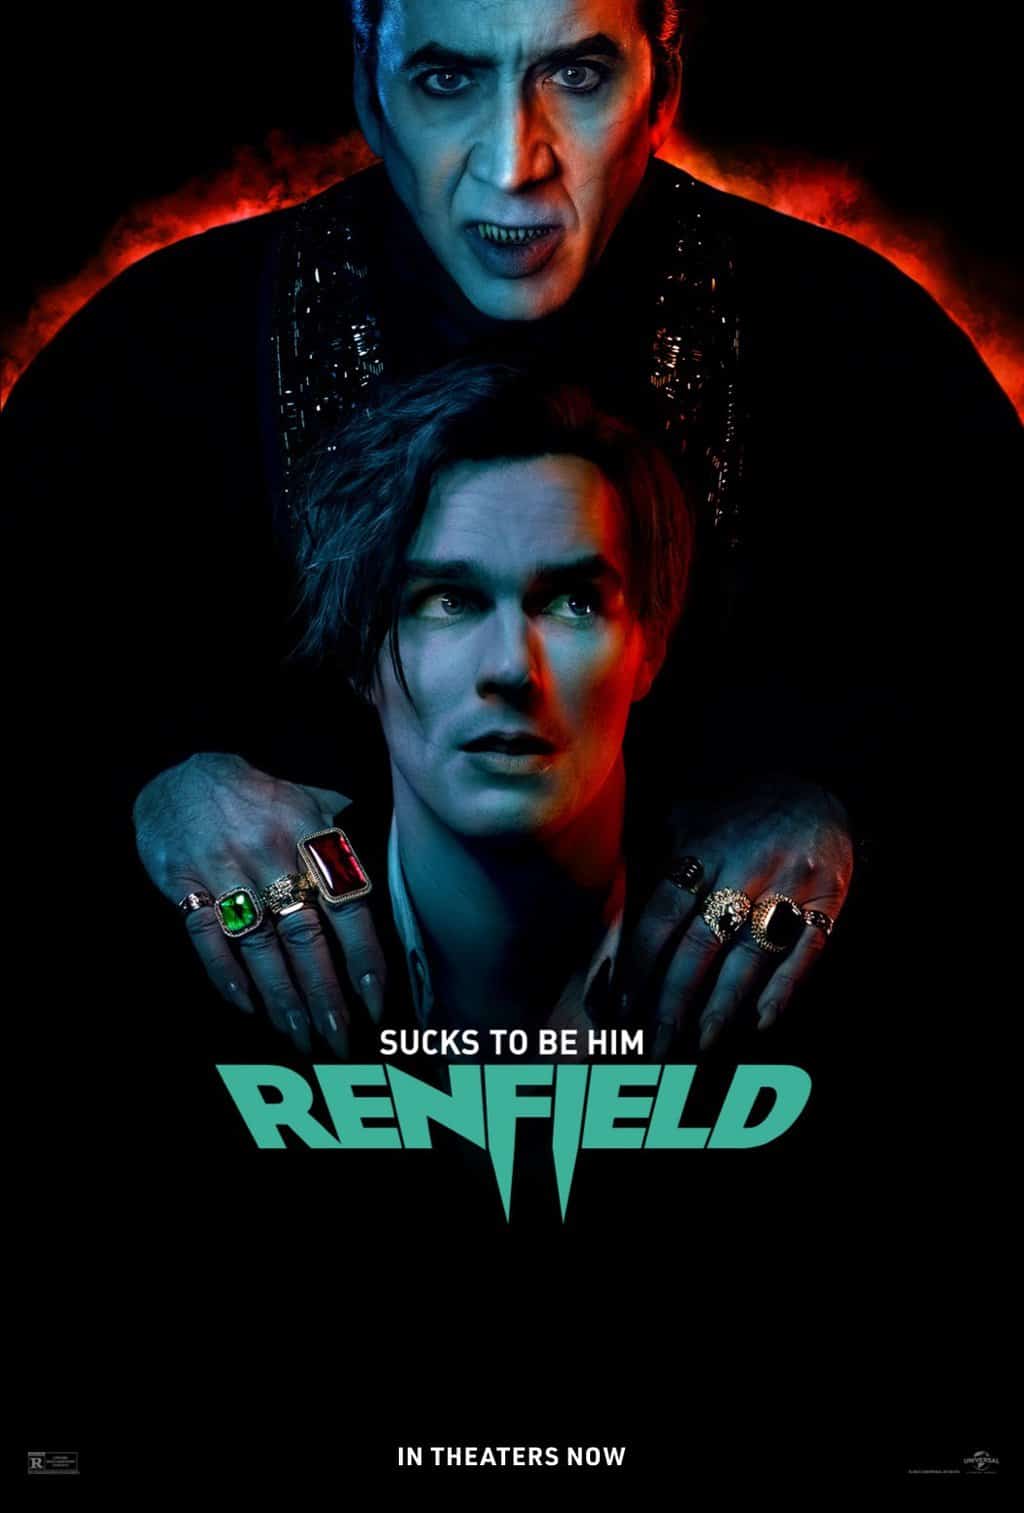 age rating of renfield poster